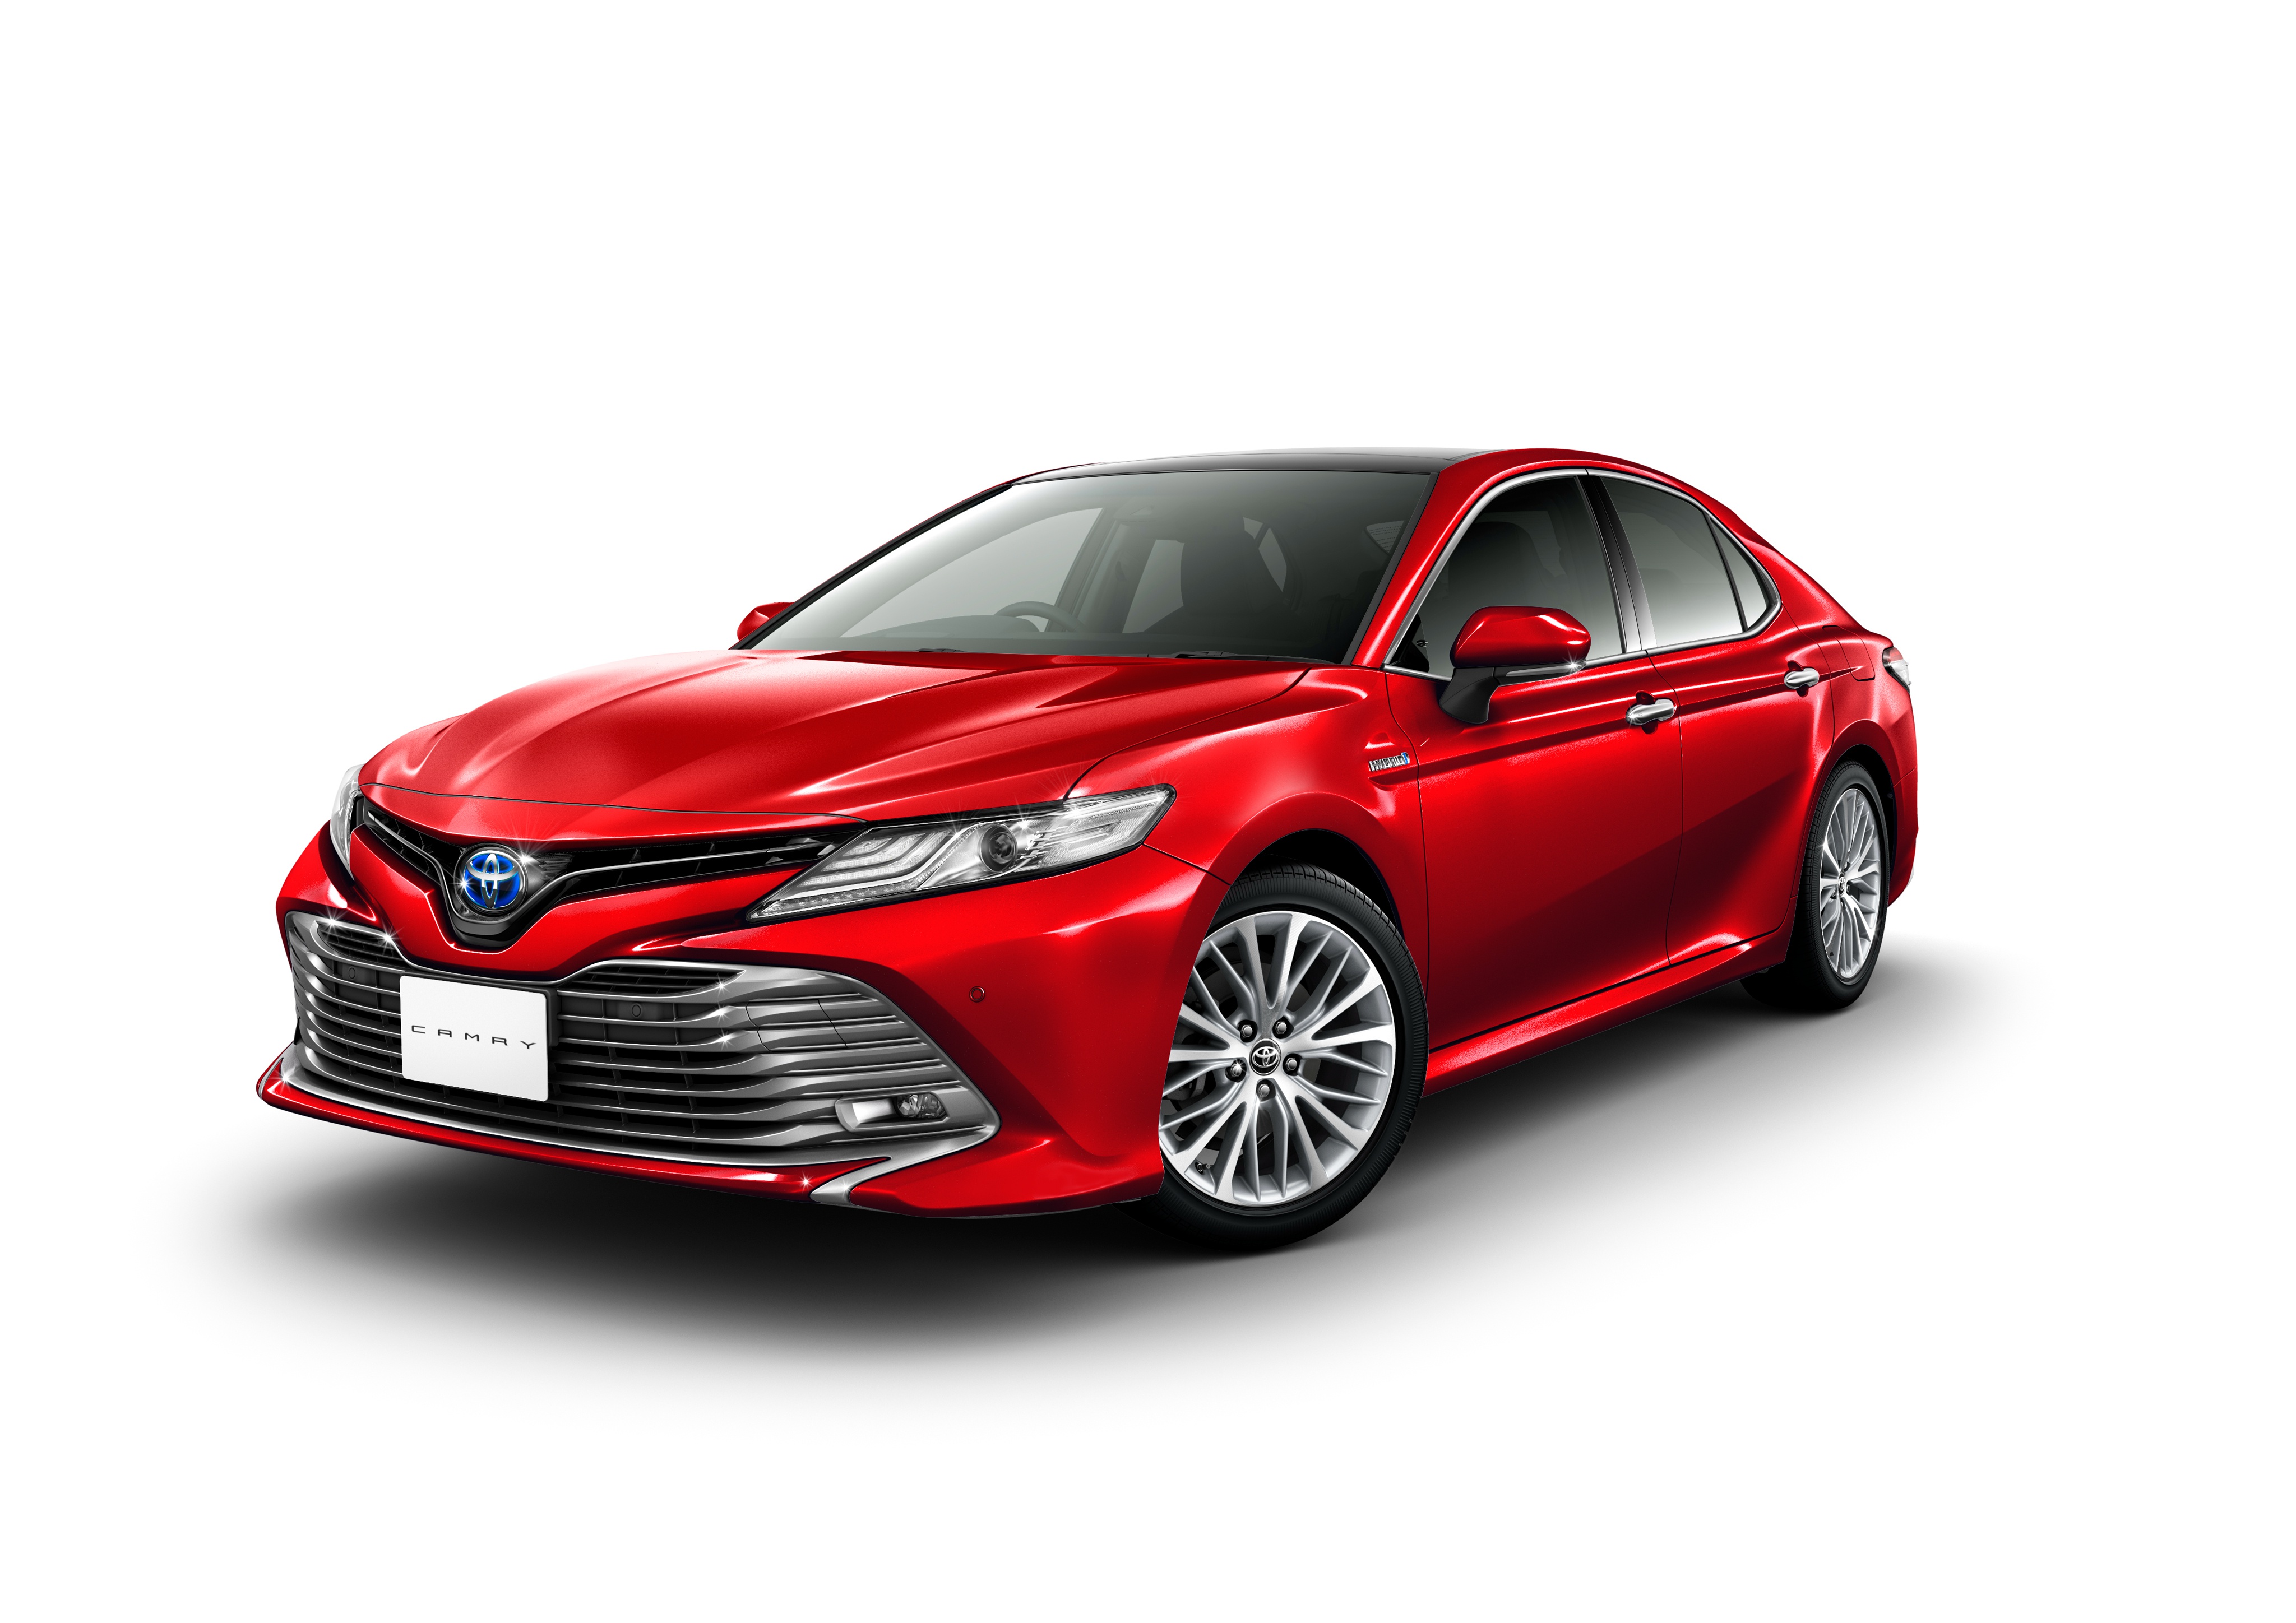 Car Compact Car Red Car Toyota Toyota Camry Vehicle 4096x2896